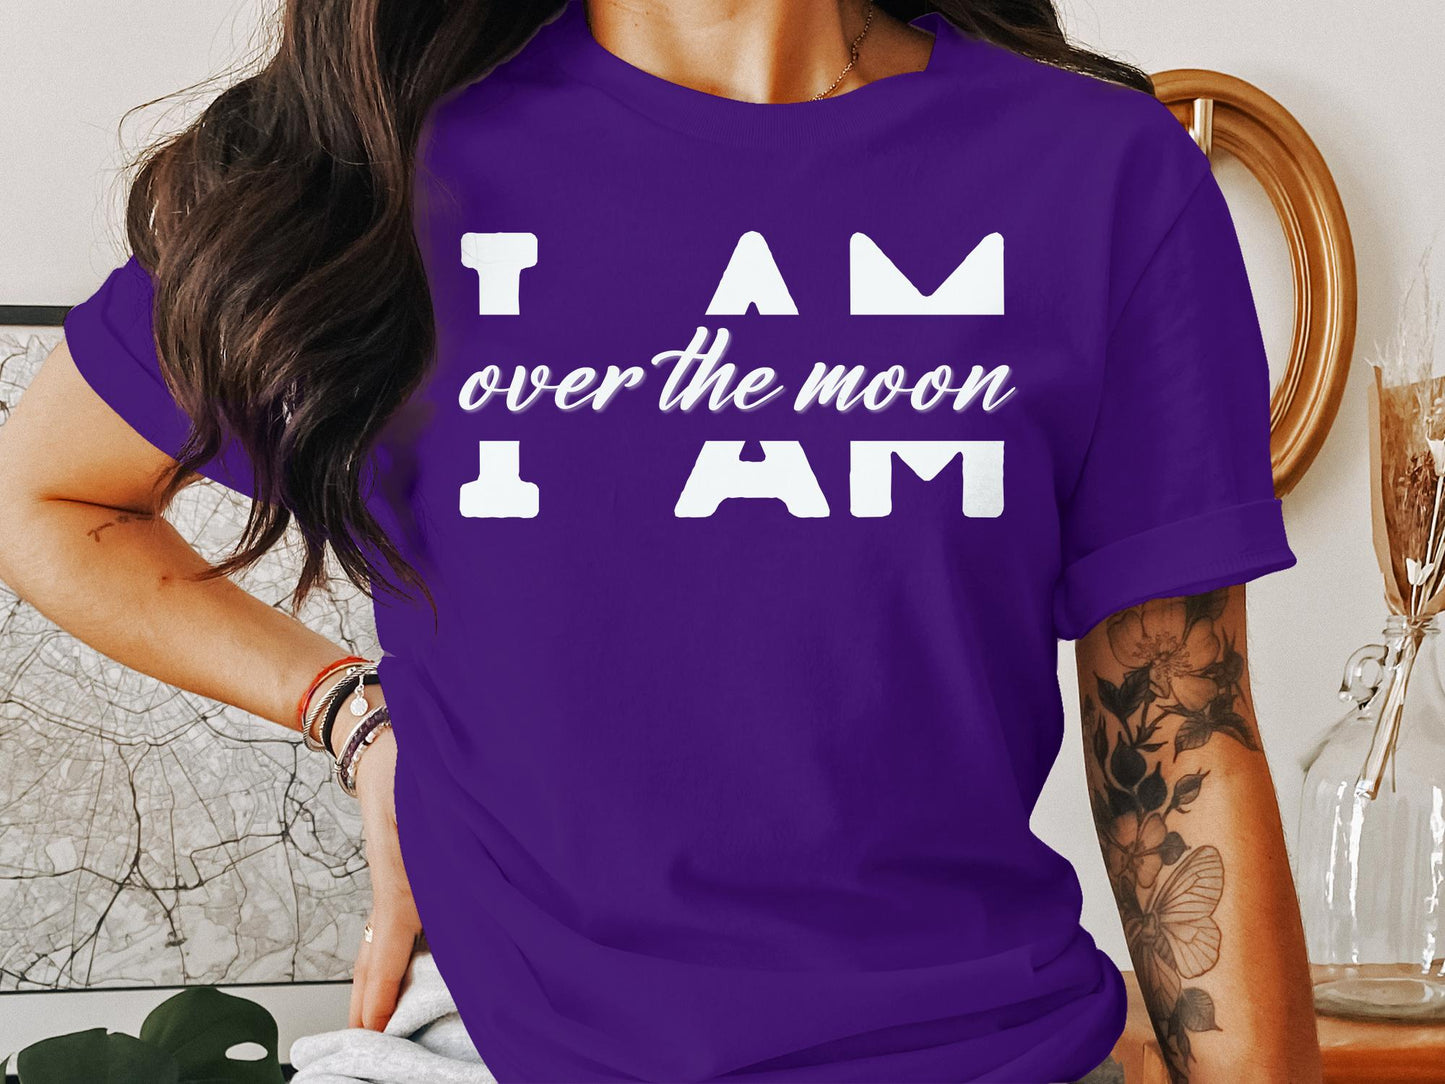 I Am Over the Moon - An encouraging and motivating Affirmation Quote T-shirt.